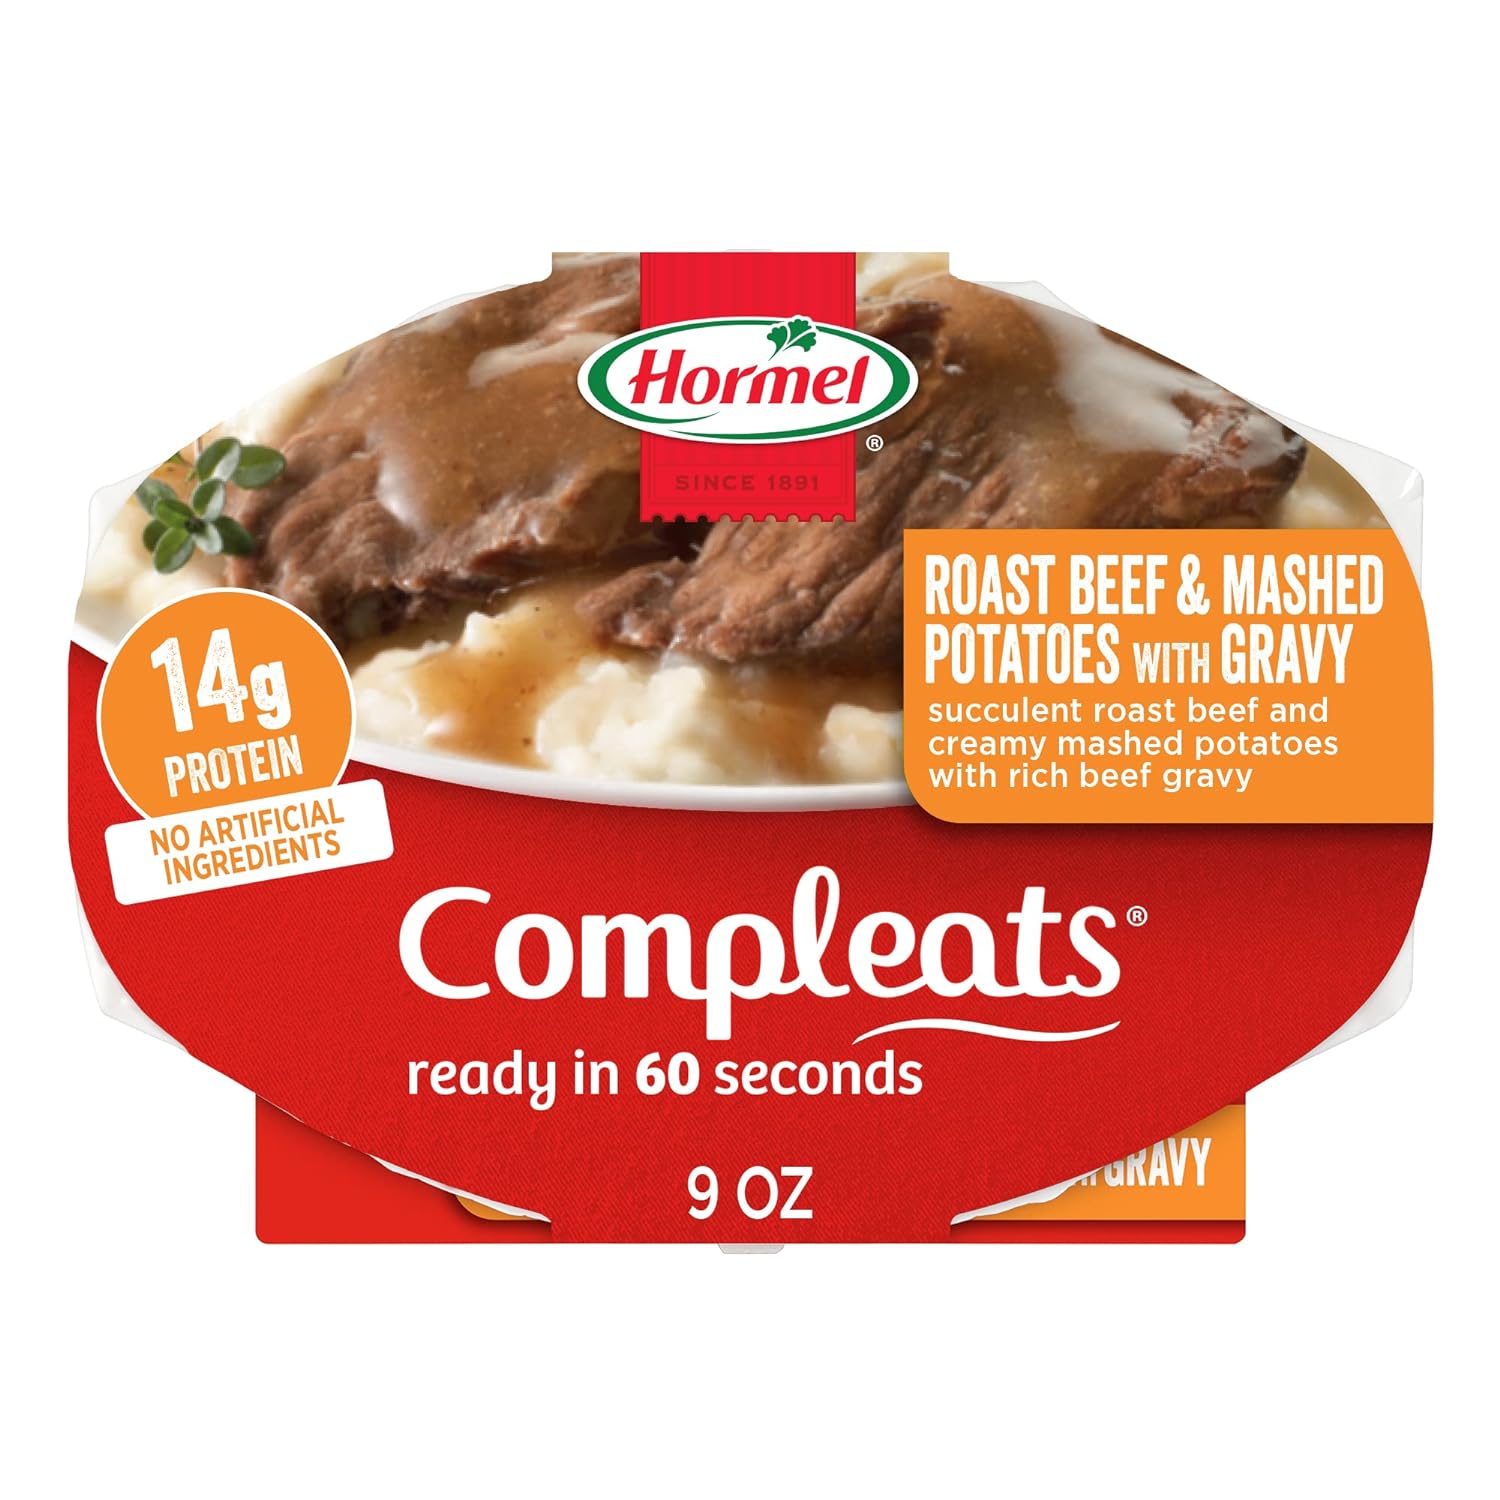 HORMEL COMPLEATS Roast Beef & Mashed Potatoes With Gravy Microwave Tray, 9 Ounce (Pack of 6)